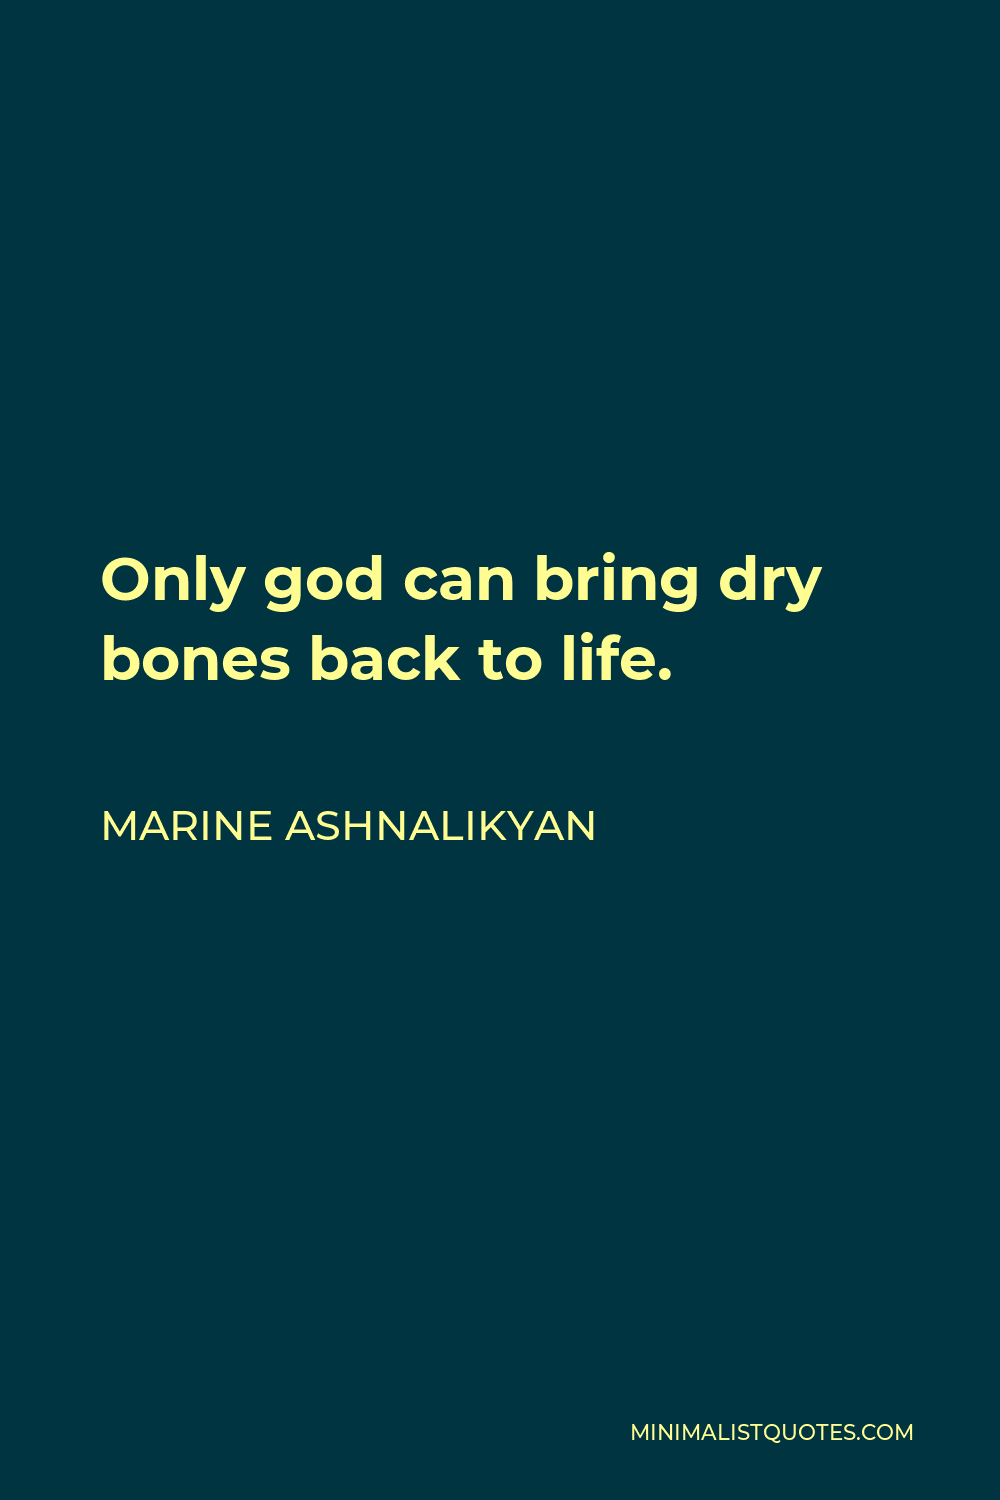 Marine Ashnalikyan Quote - Only god can bring dry bones back to life.